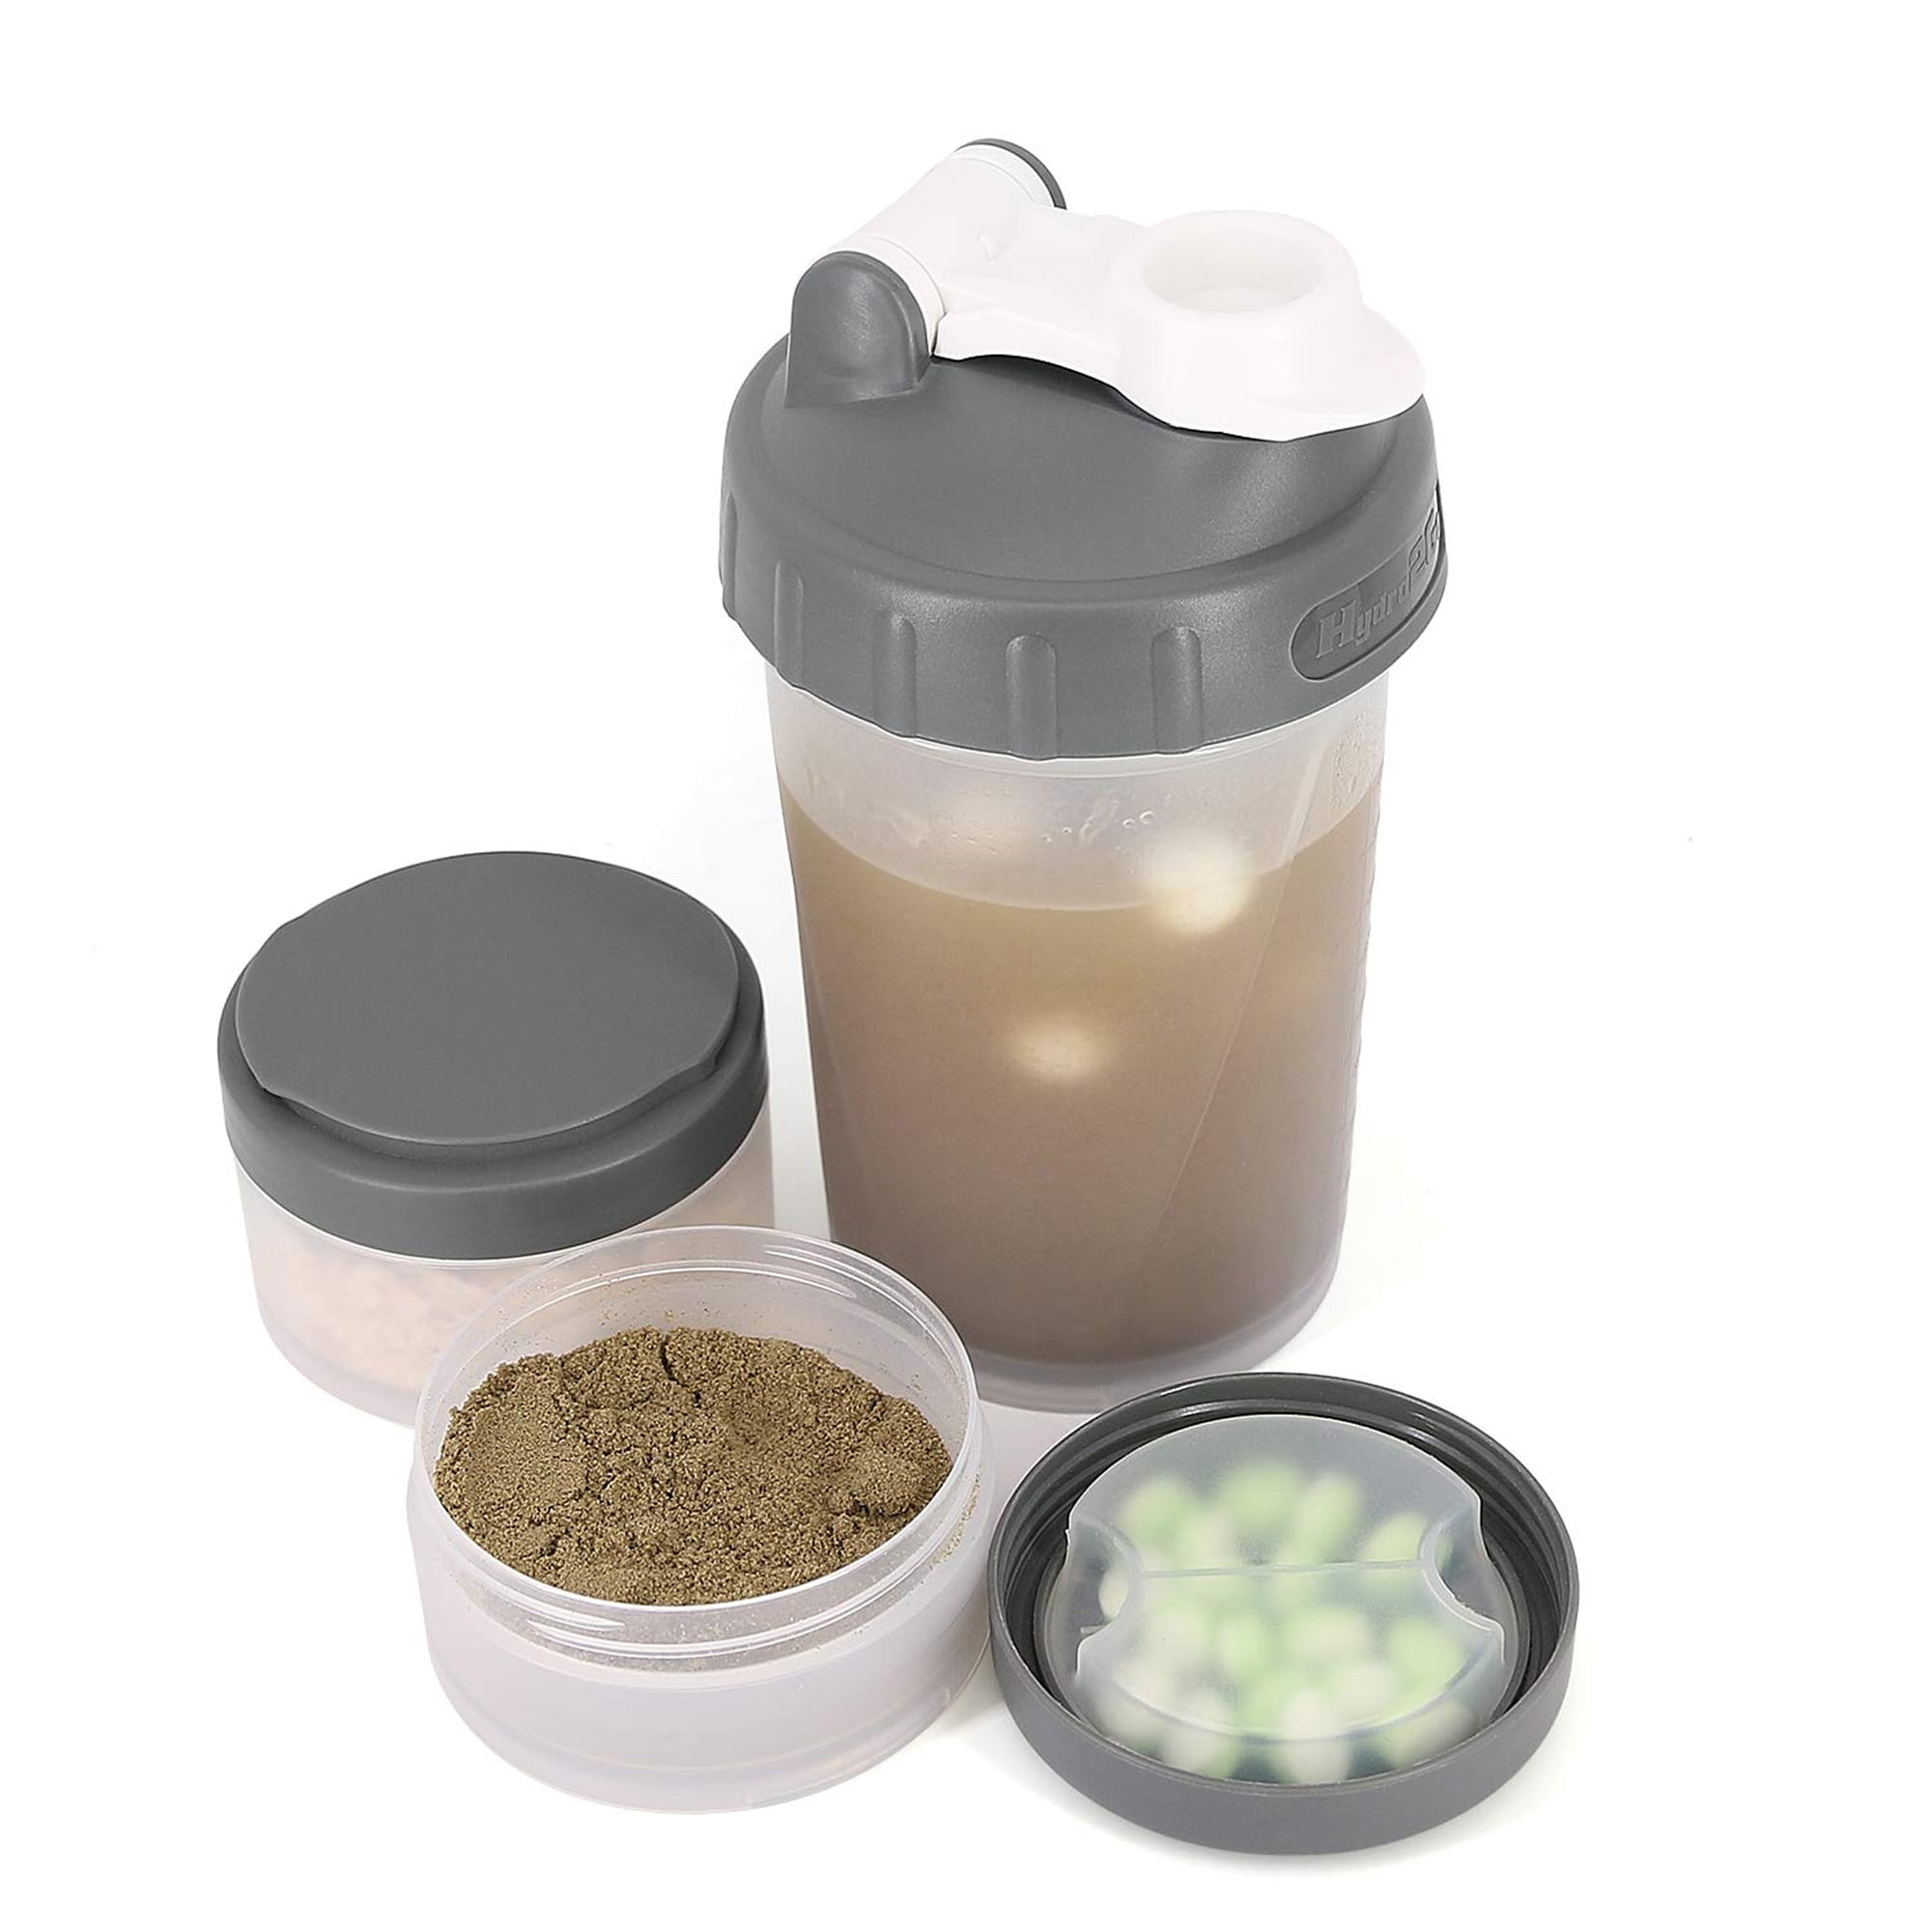 16 OZ Protein Shaker Bottle with Mixer Ball and 2 Interlocking Storage Jars  for Pills,Protein,Snacks, Coffee, Tea. 100% BPA Free,Non Toxic and Leak  Proof Sports Bottle-Grey 